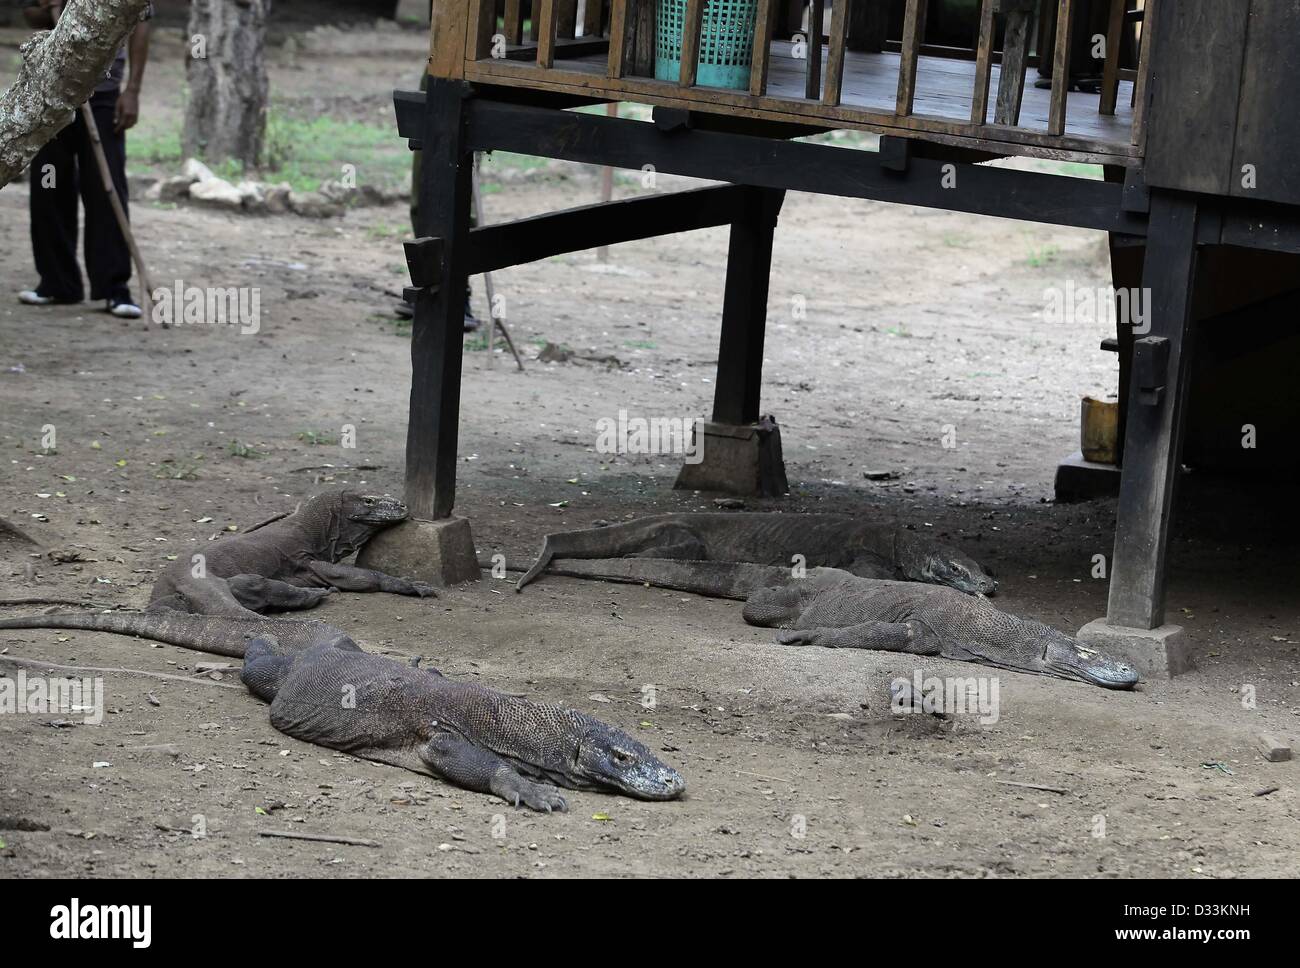 Feb. 8, 2013 - Flores, Indonesia - February 08, 2013 - Rinca Island, Flores, Indonesia ; UNDATED PHOTO - A doves (centre) were feeding near the Komodo dragon (Varanus komodoensis) in Rinca Island, Komodo National Park, Flores, Indonesia. Komodo dragons hunt and ambush prey including invertebrates, birds, and mammals. Their group behaviour in hunting is.exceptional in the reptile world. The diet of big Komodo dragons.mainly consists of deer, though they also eat considerable amounts of.carrion. Komodo dragons also occasionally attack humans in the area of.West Manggarai Regency where they live  Stock Photo